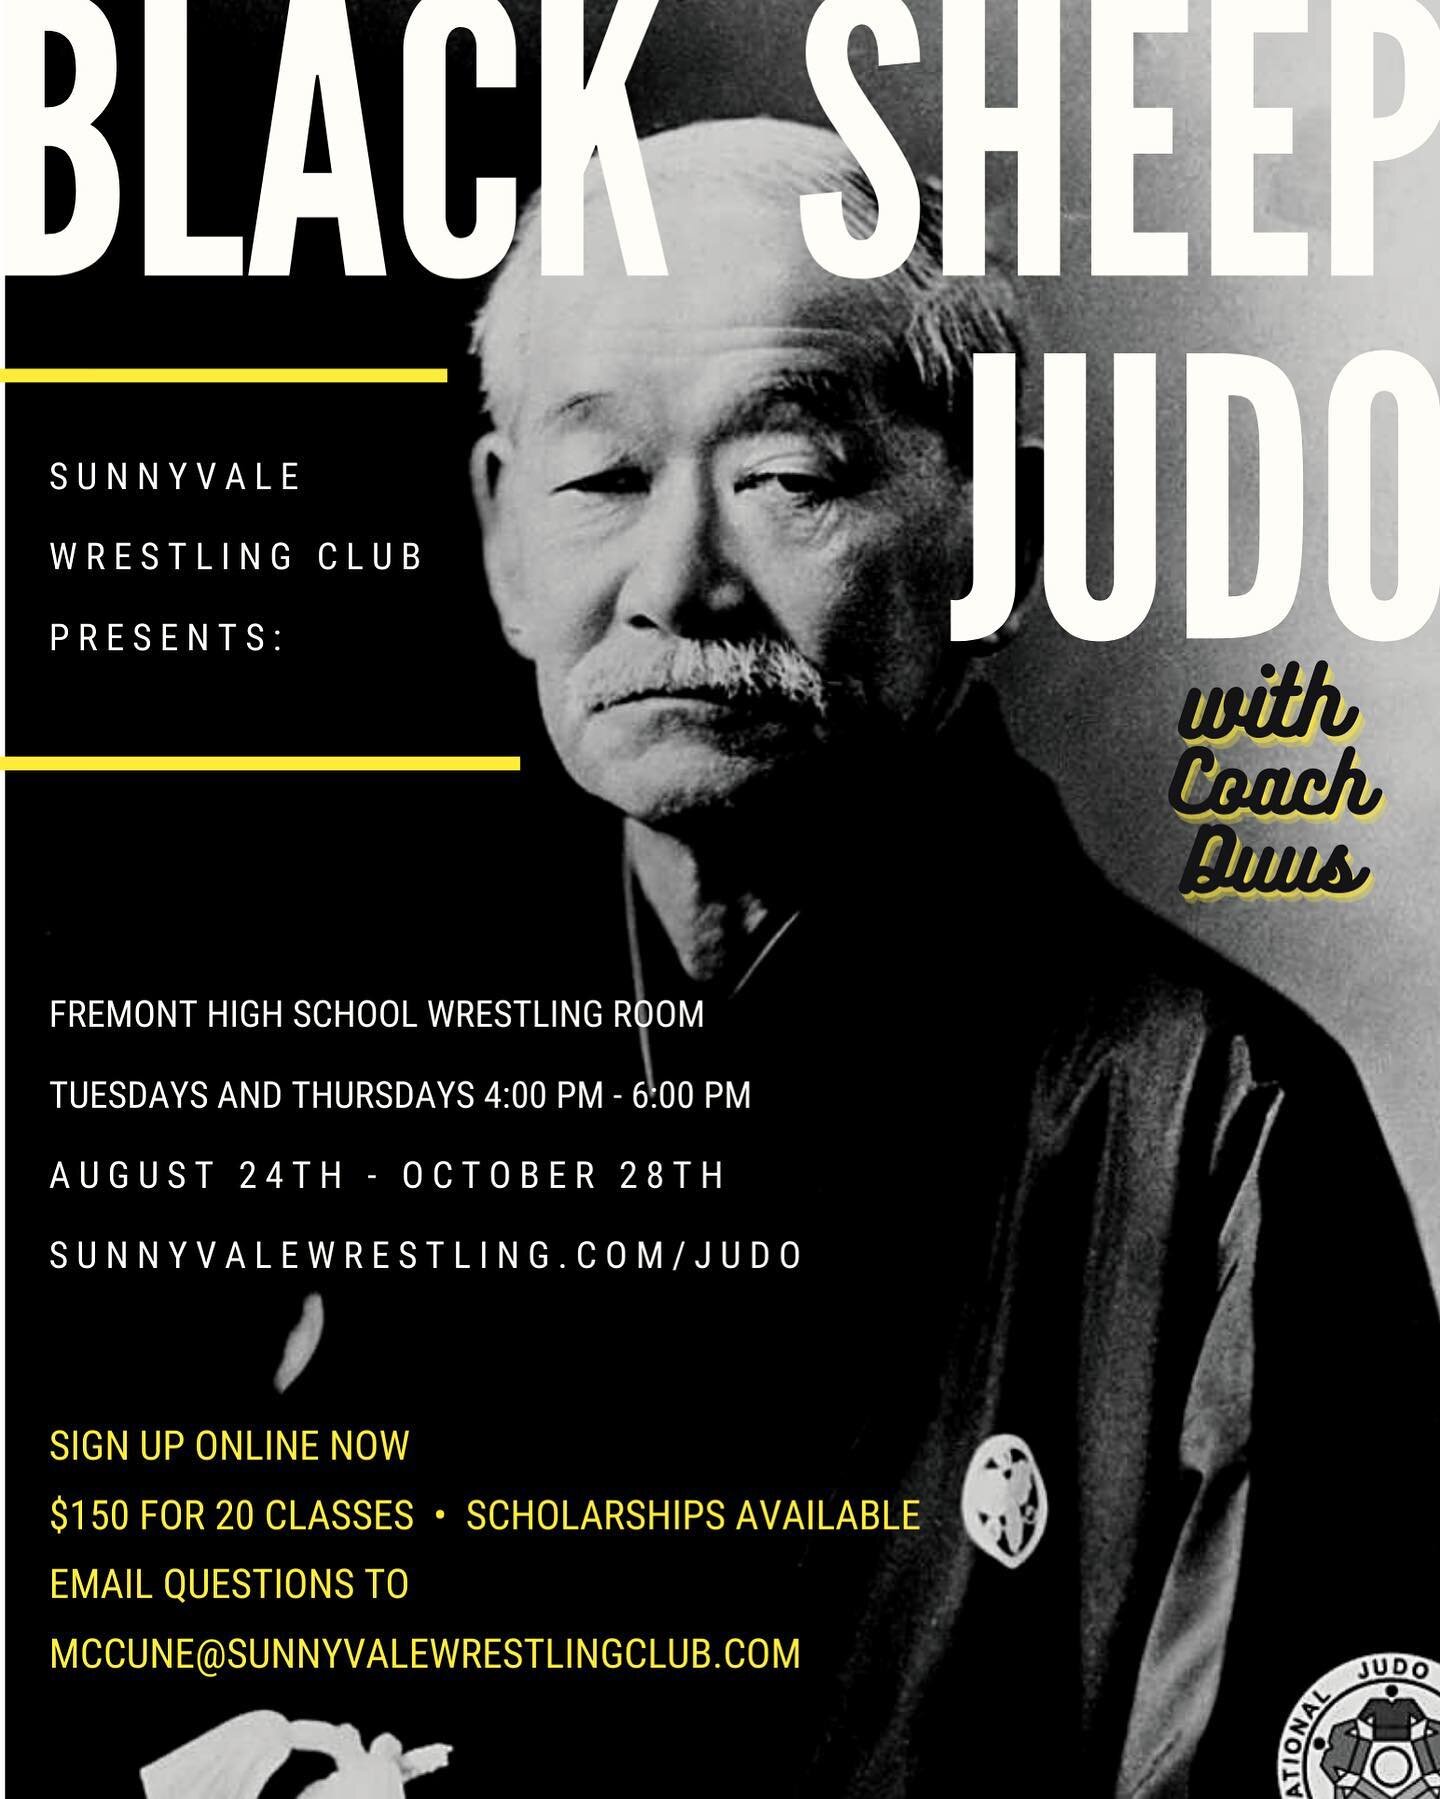 Join Coach Duus for pre-season Judo. Traditional gi Judo on Tuesday and on Thursday transitioning those skills to Folkstyle wrestling without the gi. Sign up link in bio or https://www.sunnyvalewrestling.com/judo